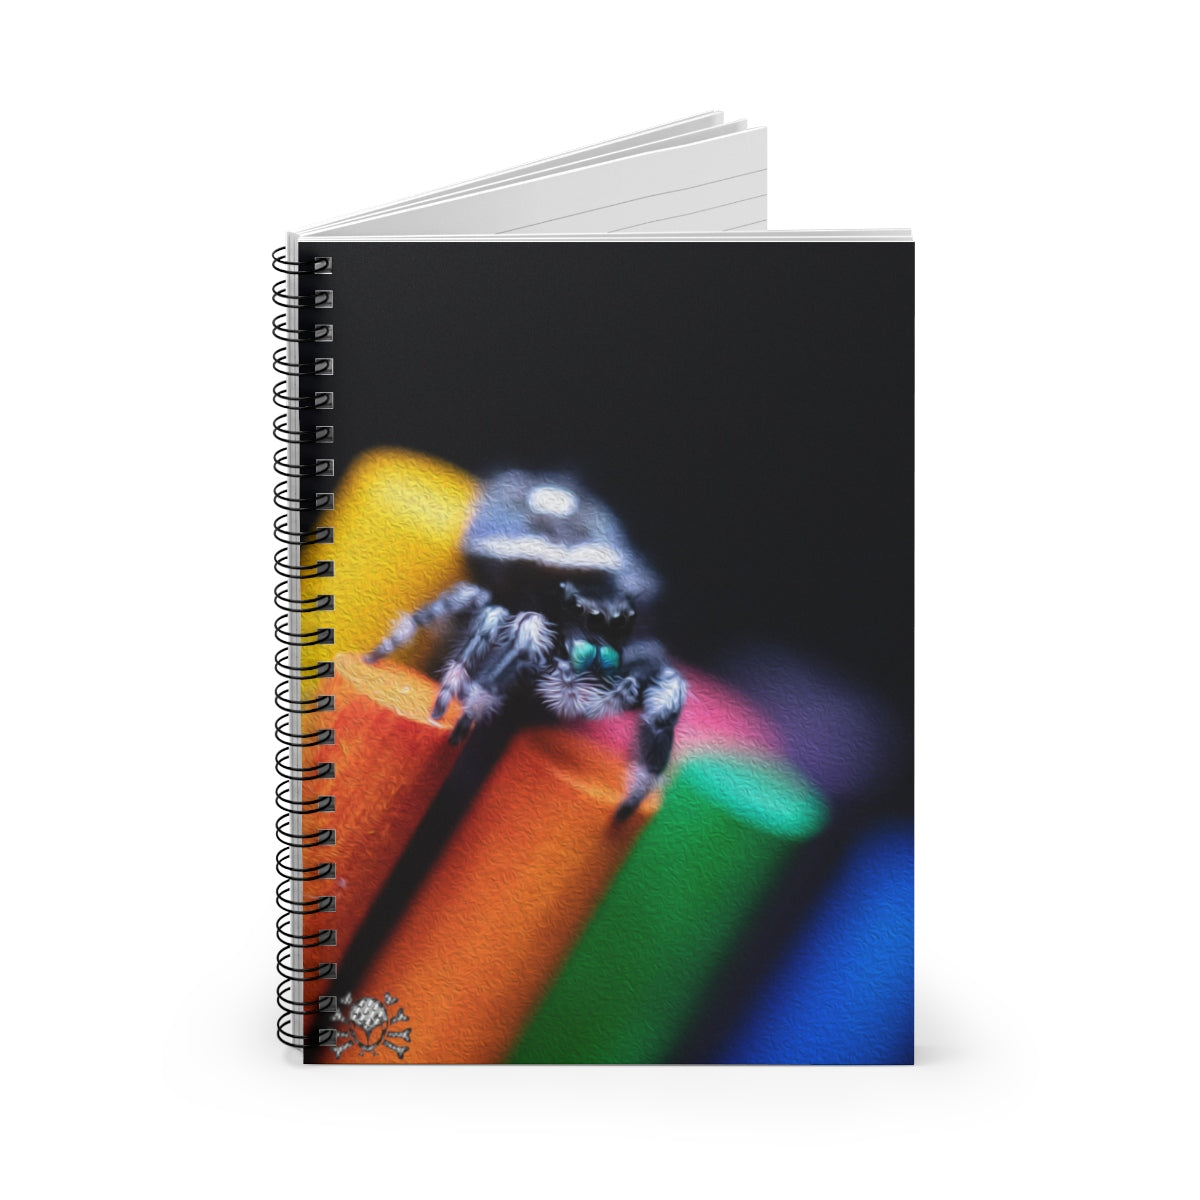 Spiral Notebook - Ruled Line With Jumping Spider Art